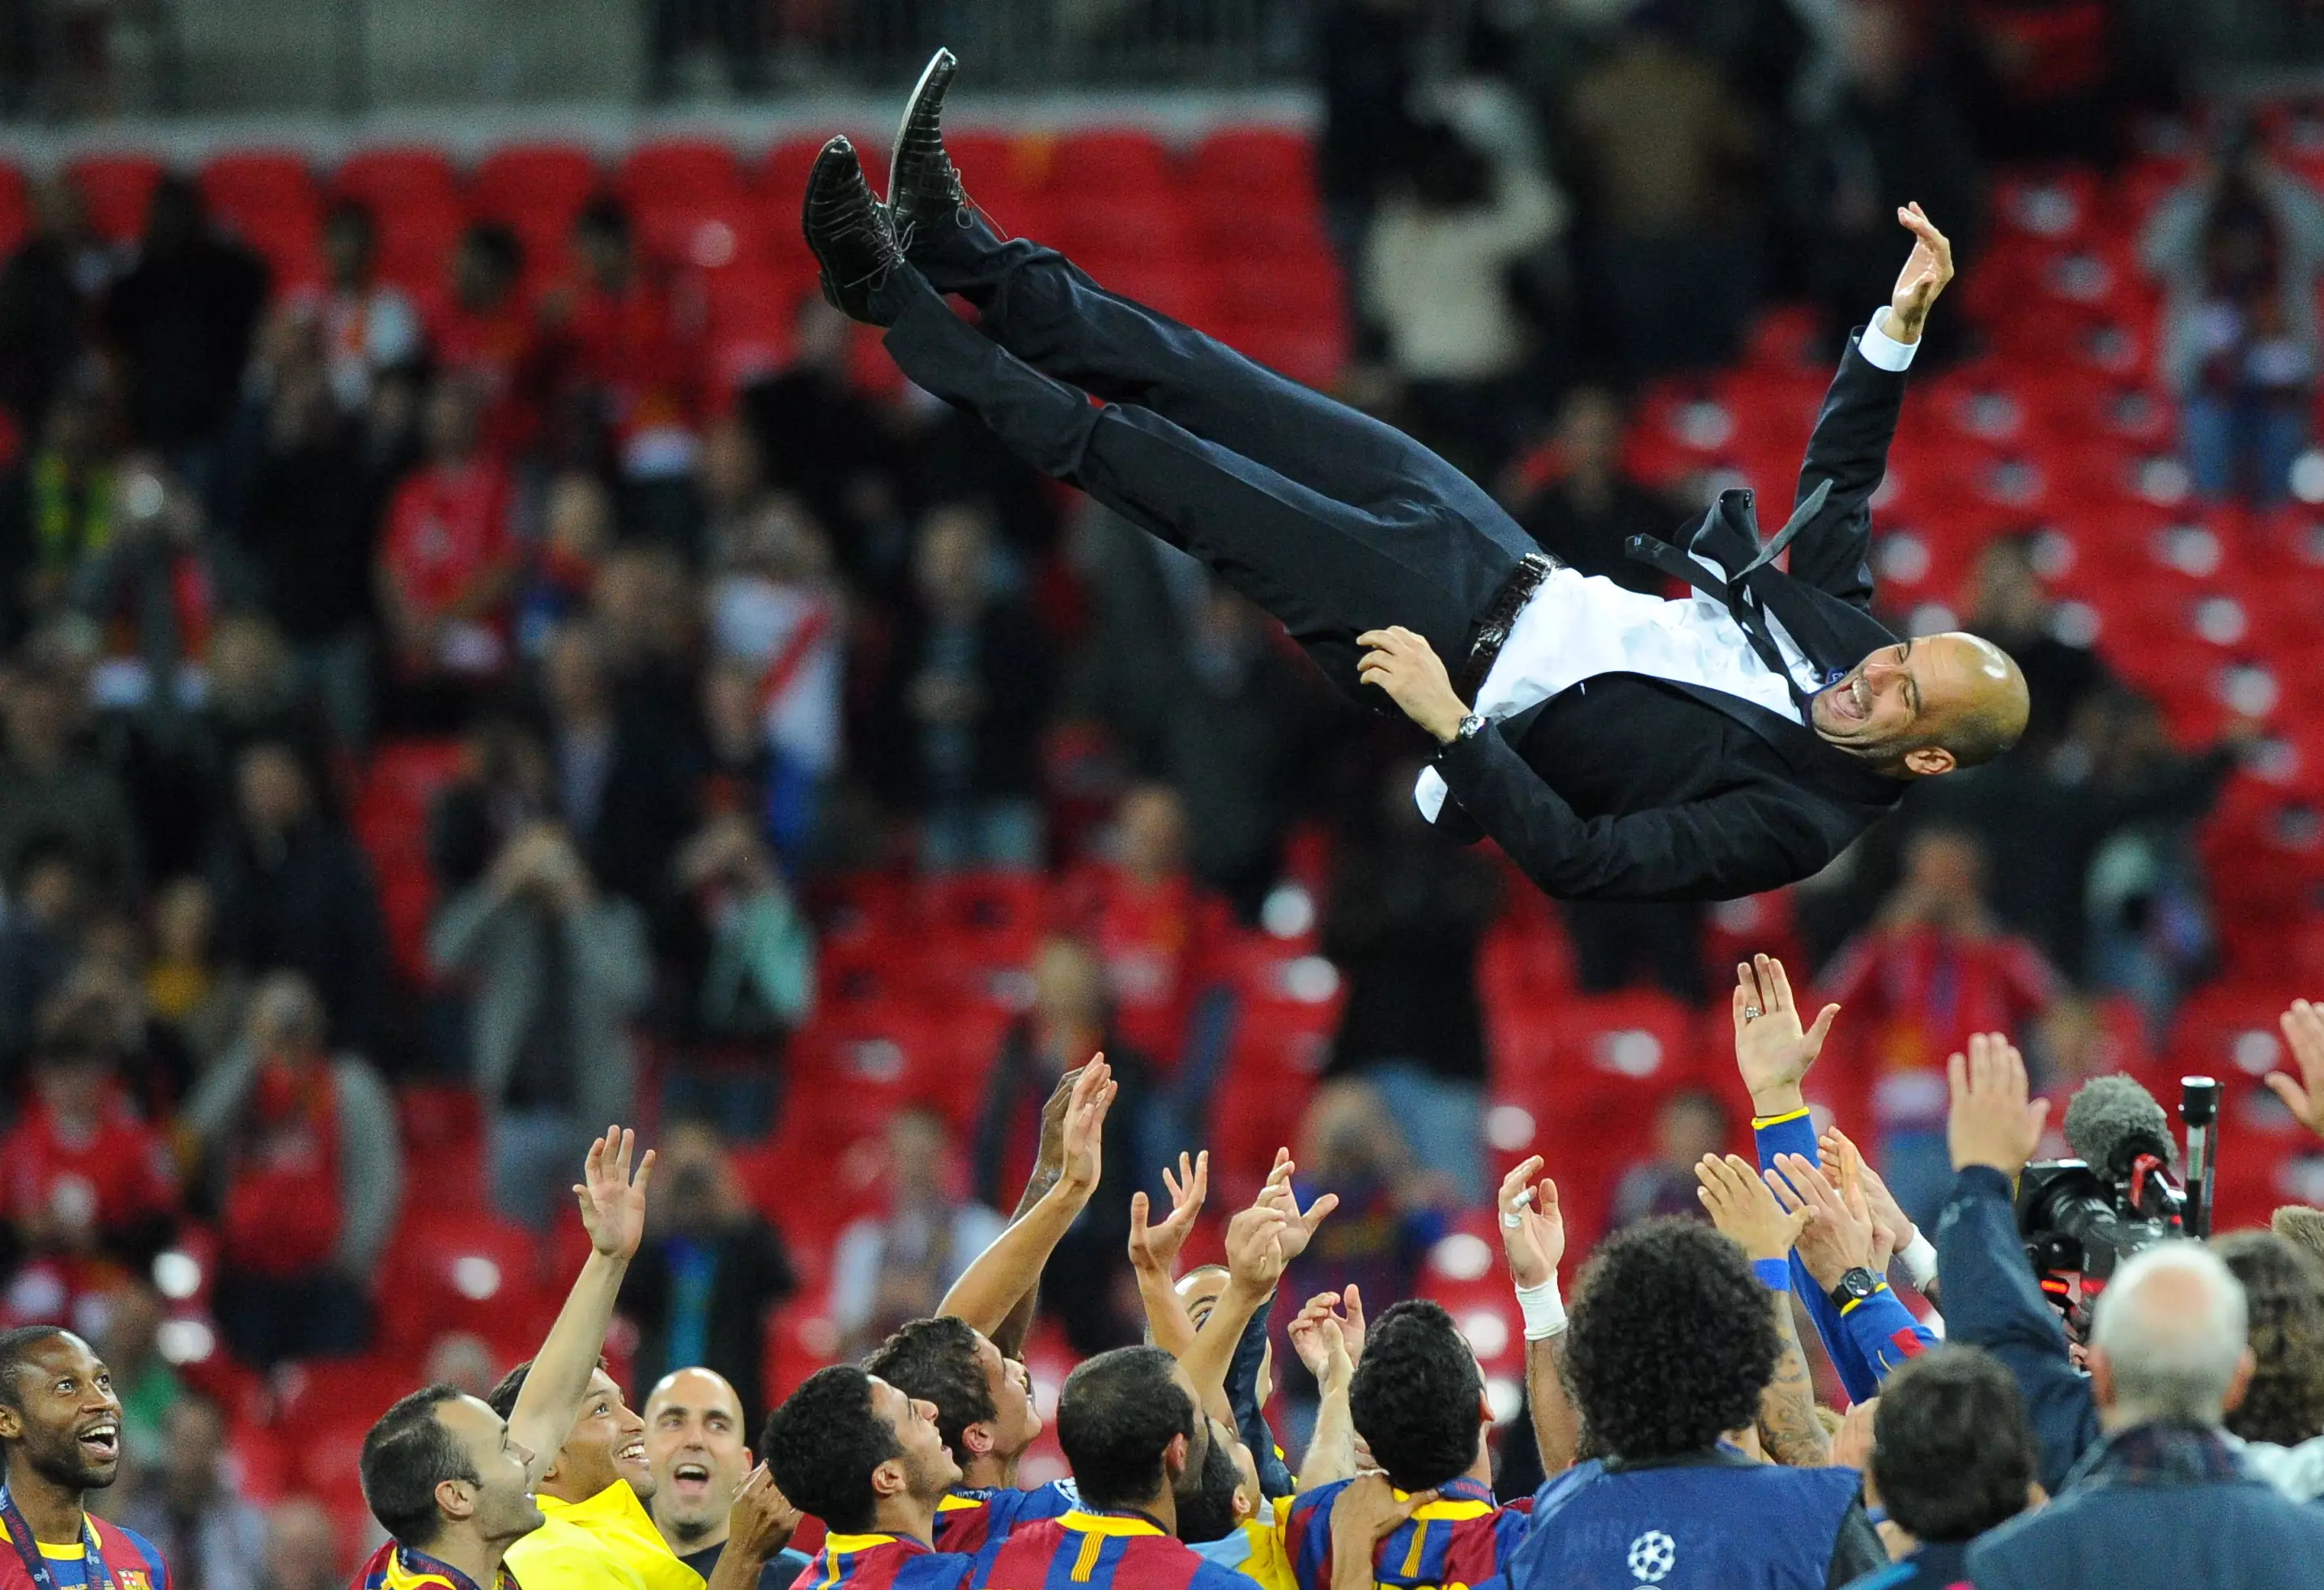 Guardiola is thrown into the air by his Barcelona squad after winning the competition in 2011. (Image